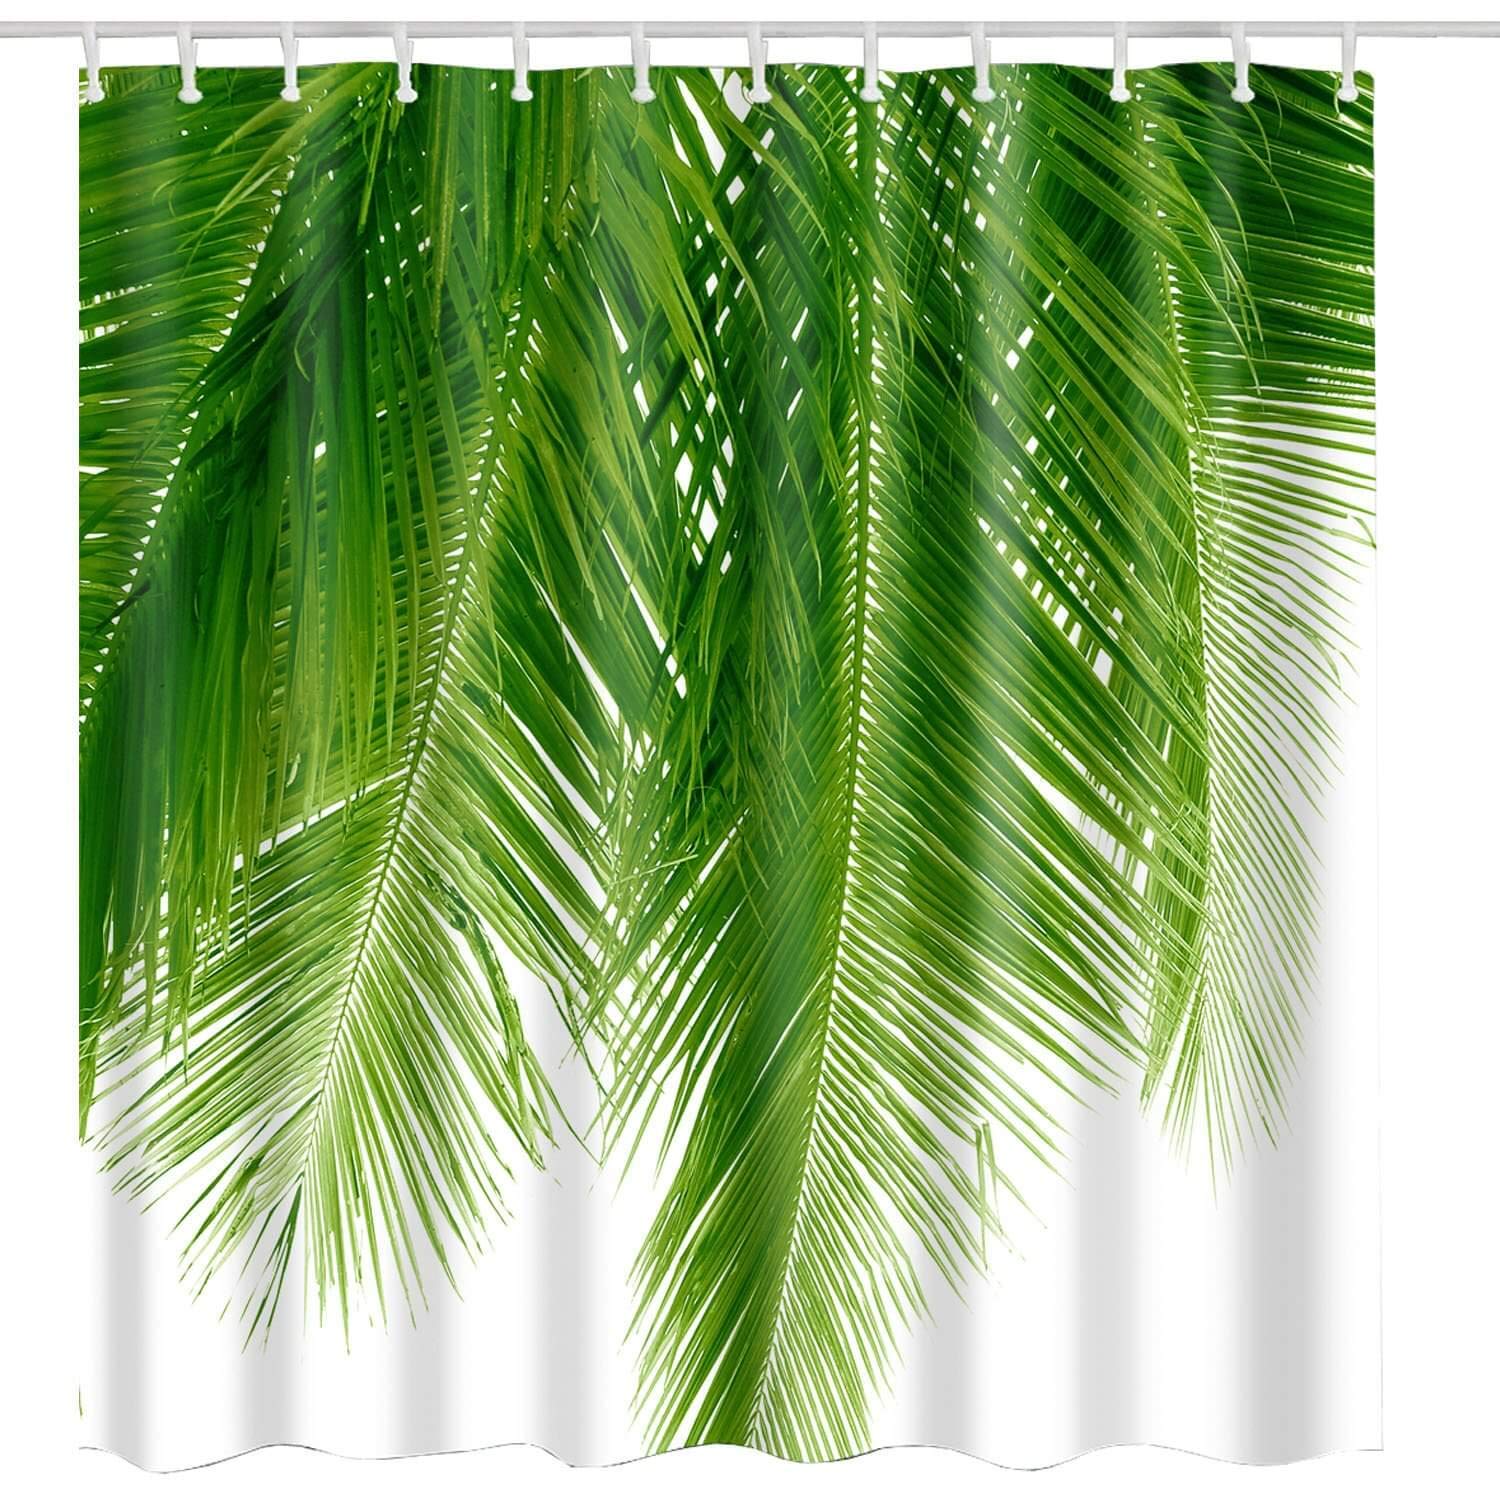 BROSHAN Green Leaf Shower Curtain Fabric, Summer Tropical Palm Leaves Plant Polyester Shower Curtain Nature with Hooks for Hawaiian Bathroom Decor Set,72 x 72 Inch